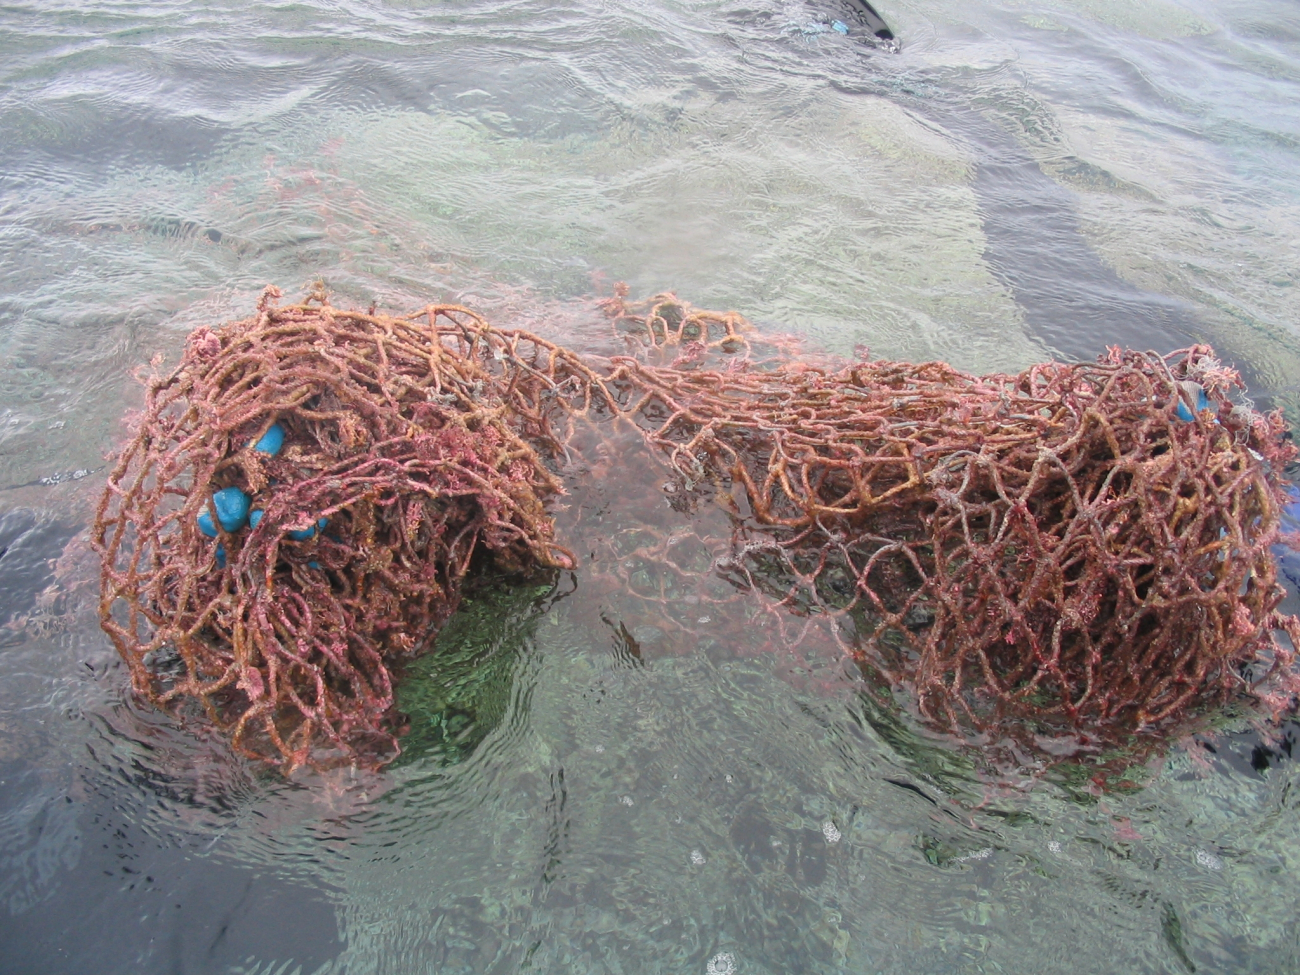 Derelict net on surface after removal from reef